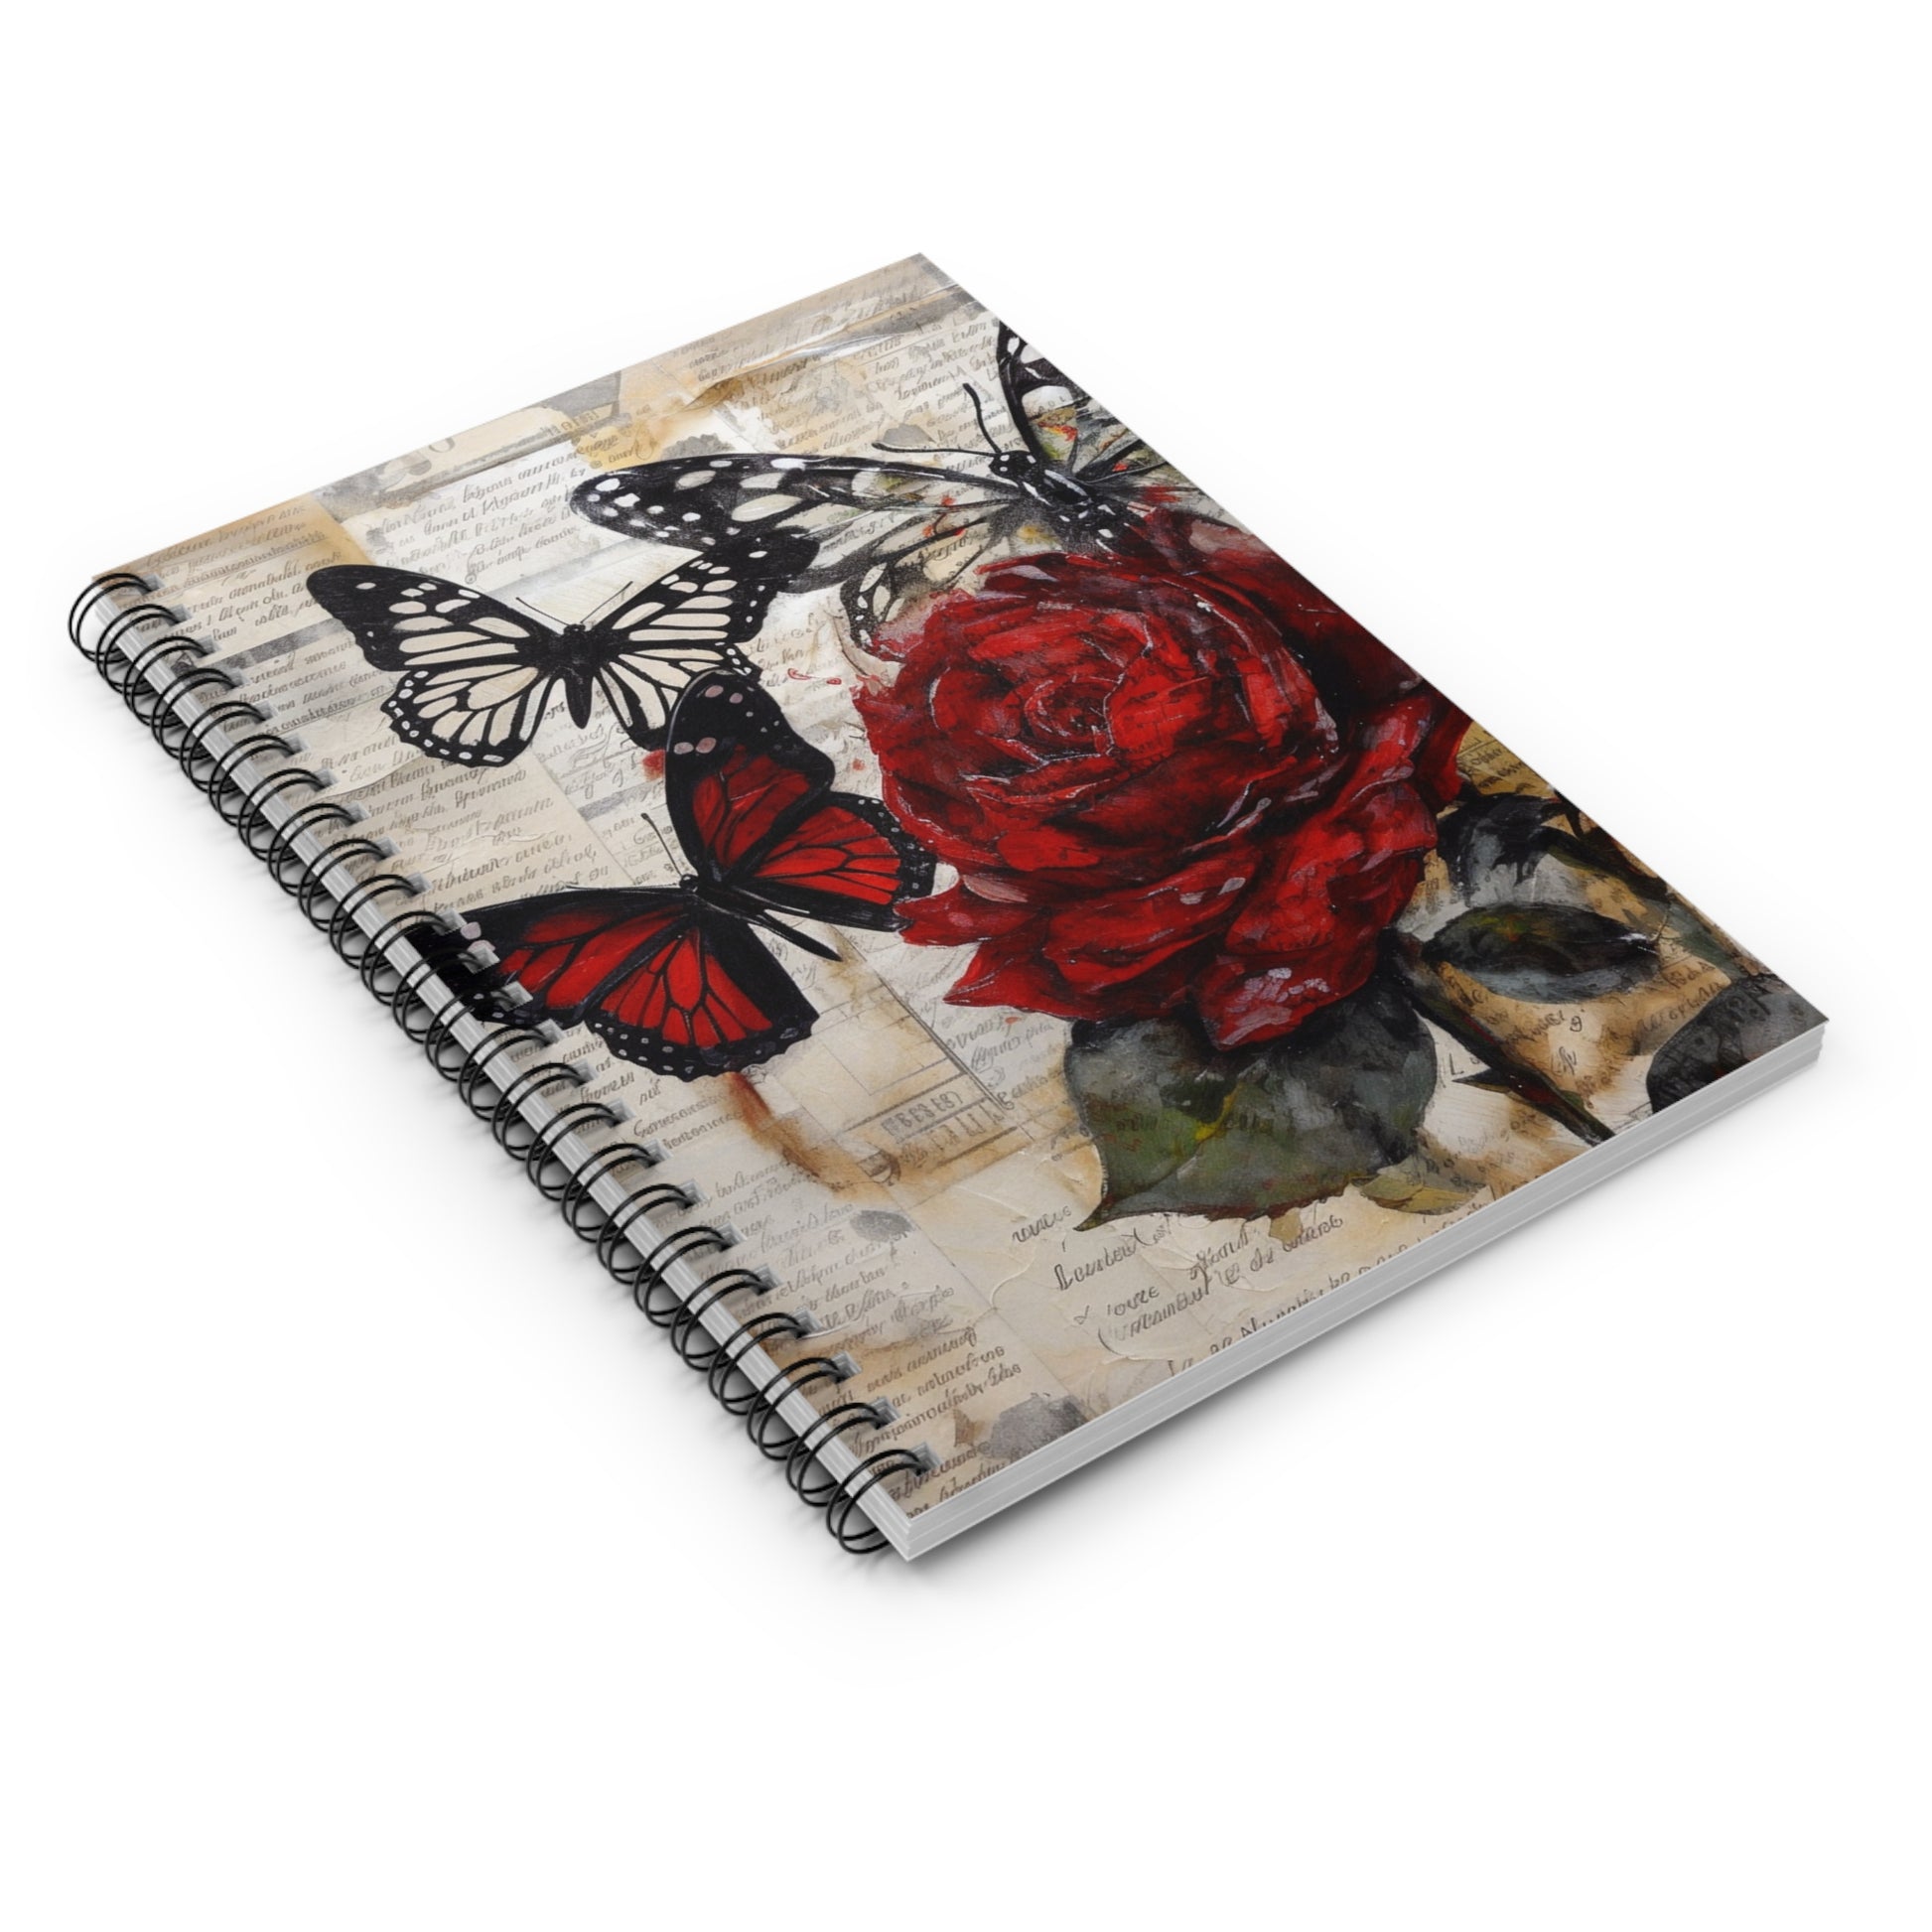 Spiral notebook - Ruled Line - Butterflies and a red rose on desk